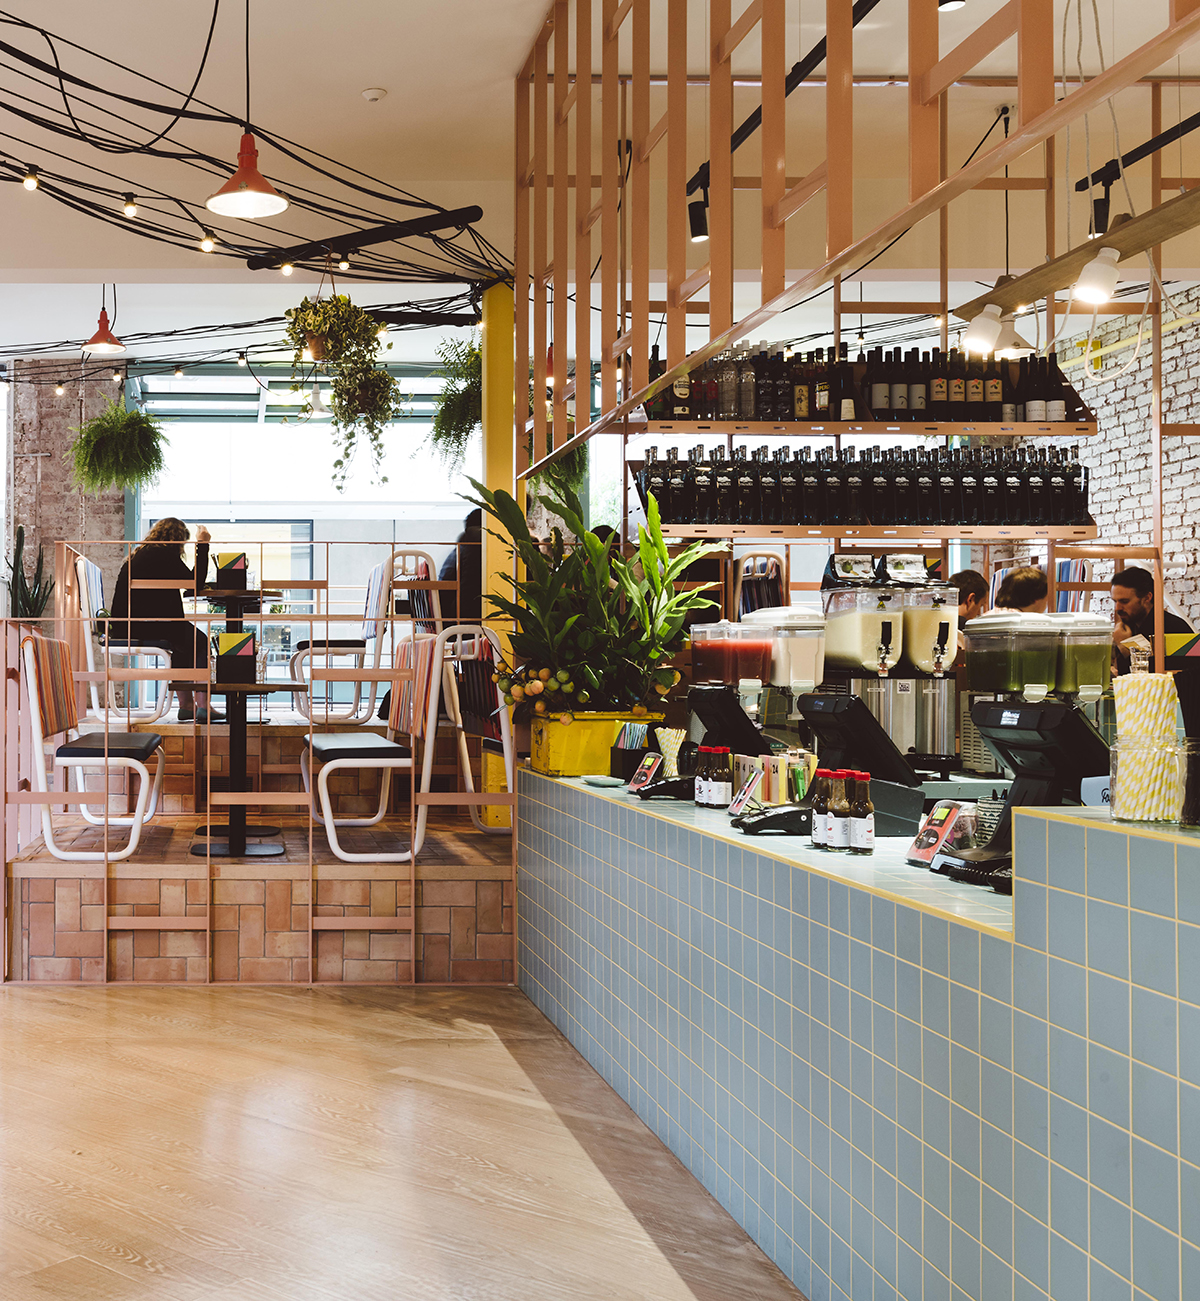  Fonda Mexican Restaurant Melbourne designed by Techne Architects 